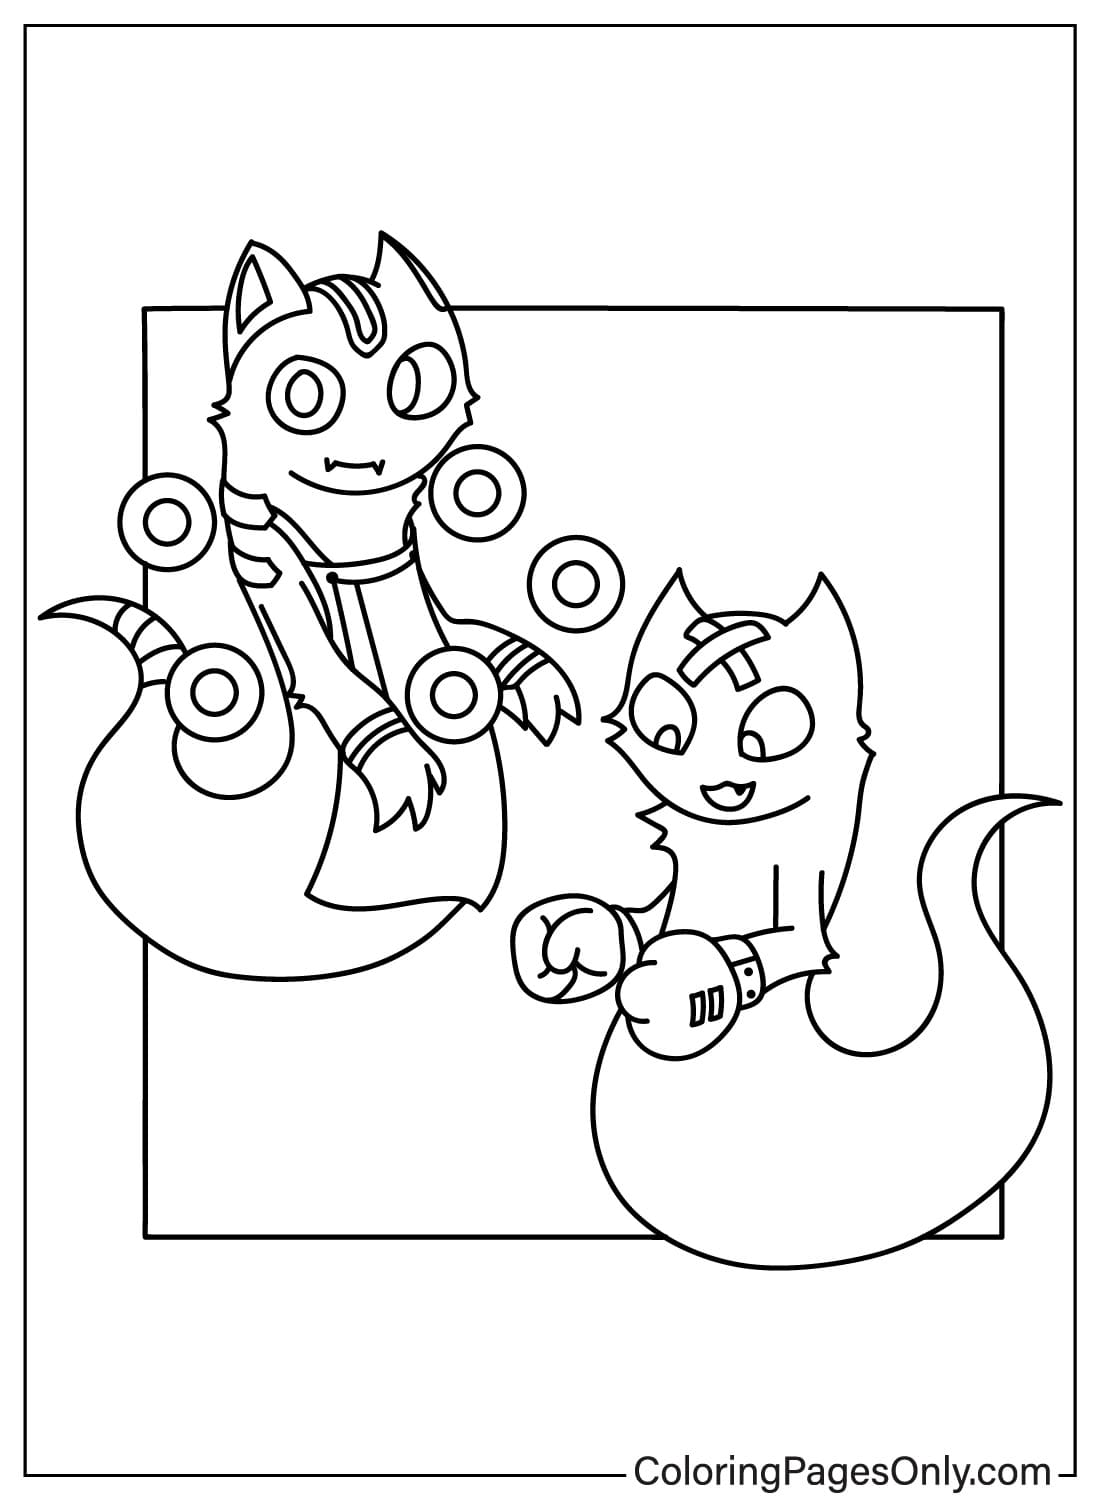 Free Printable Ghazt Coloring Page from Ghazt